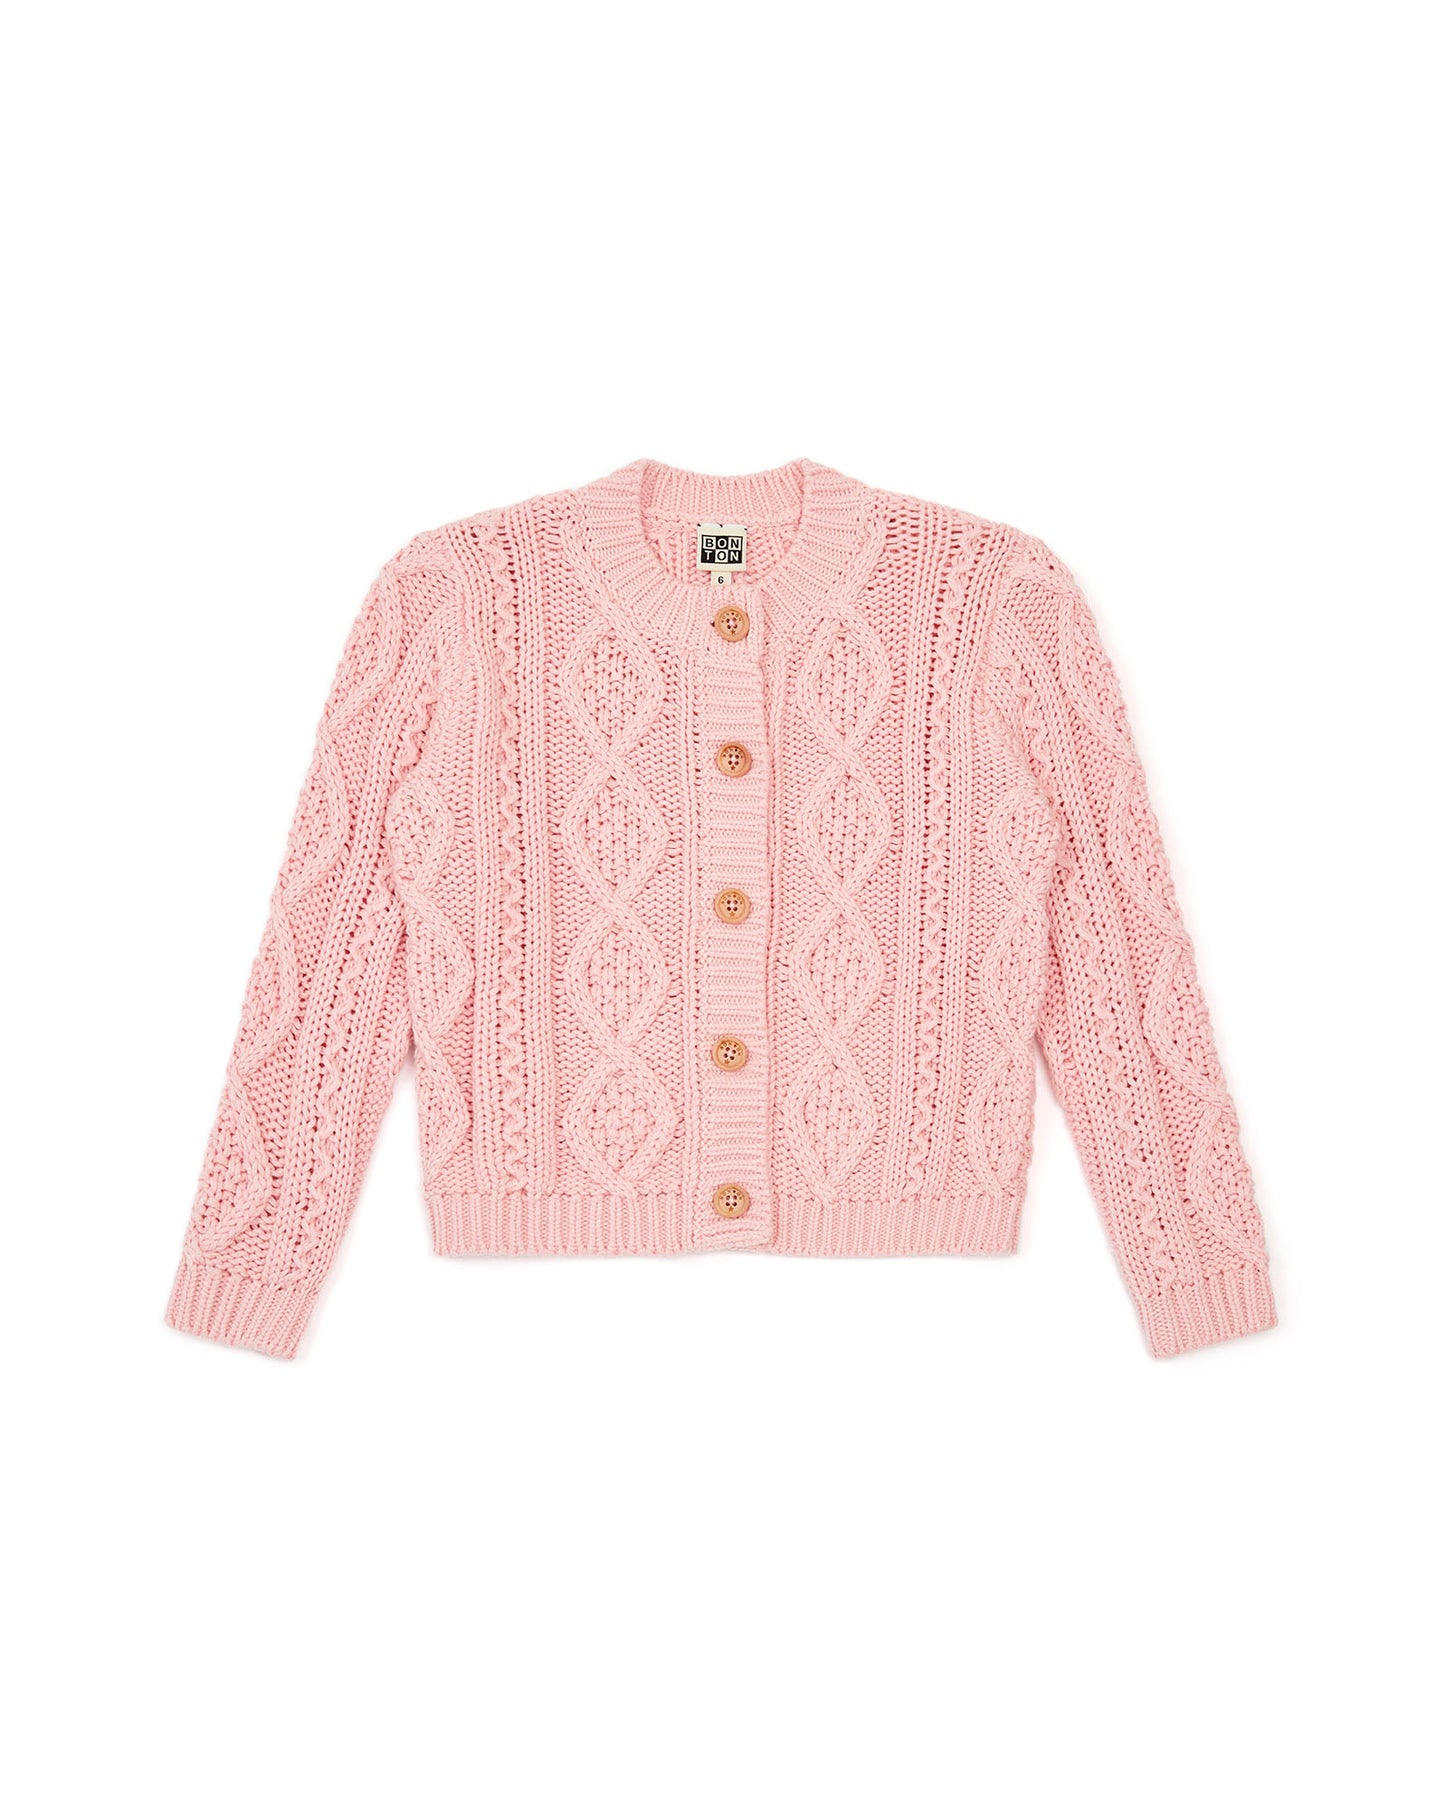 Cardigan - Tiffany rose coton maille ajourée